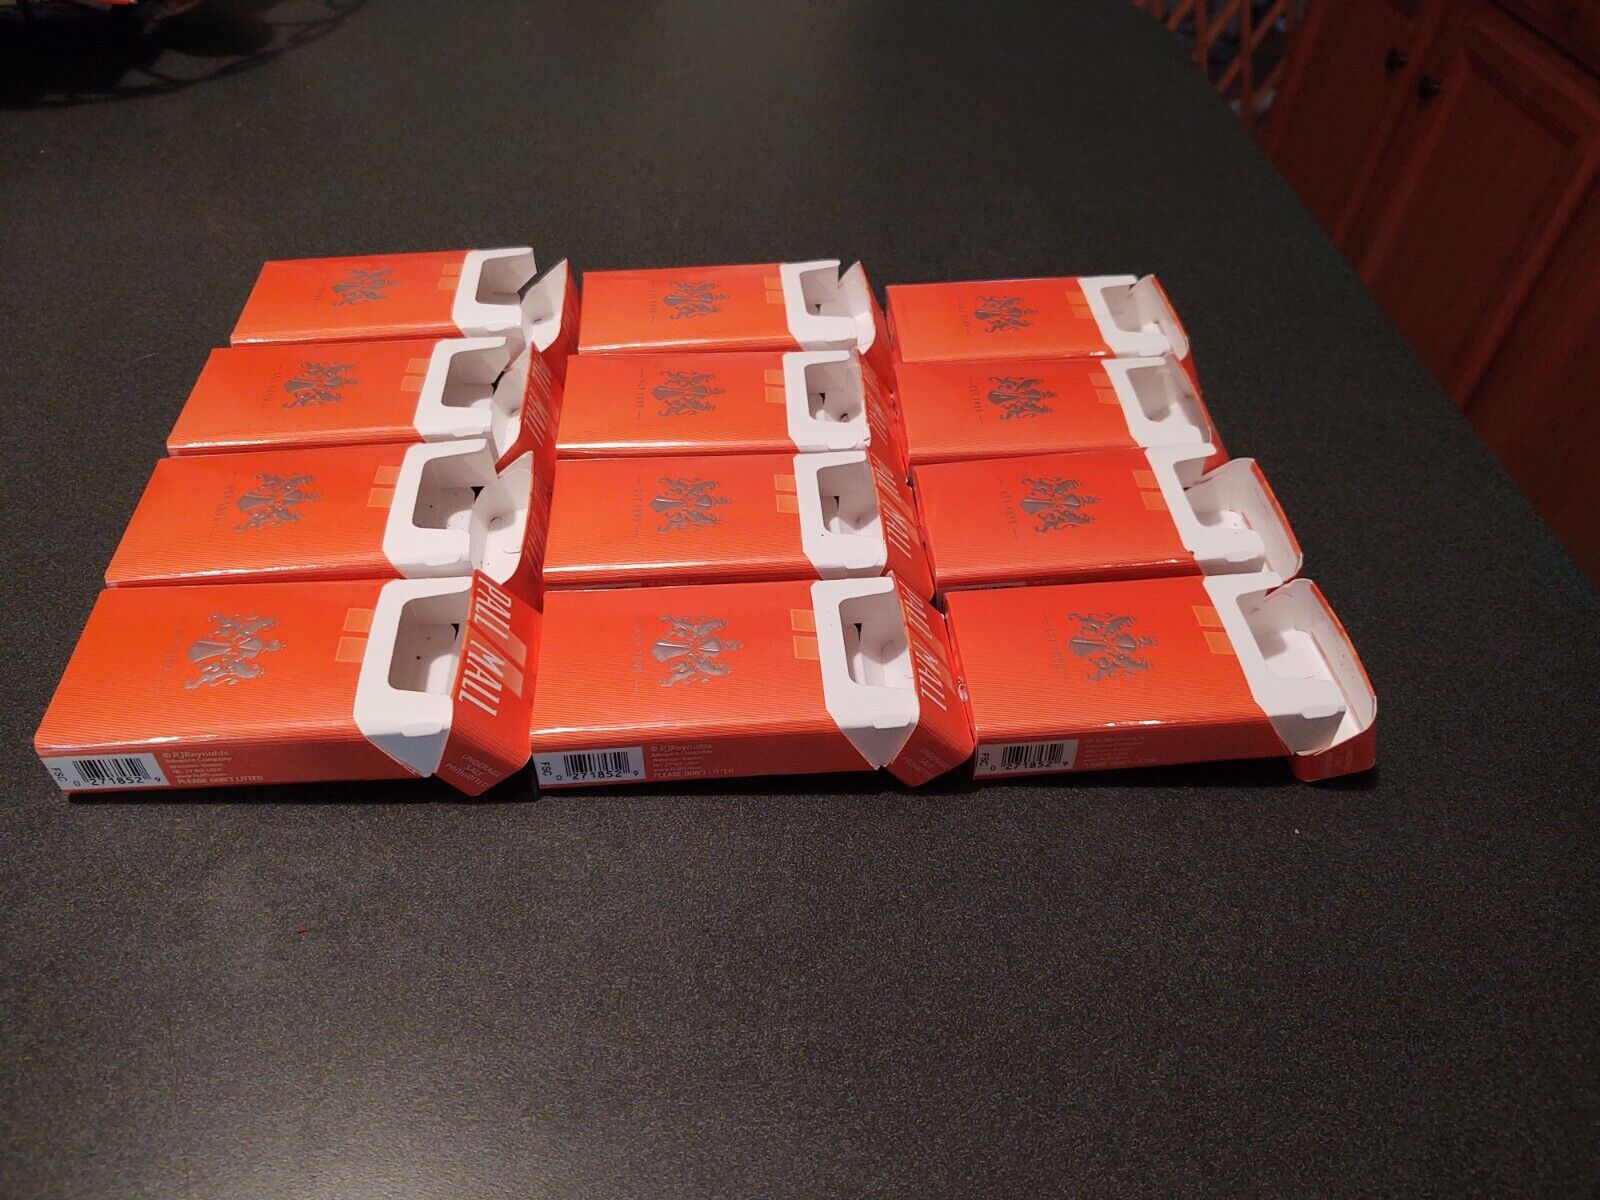 LOT OF 50 PCS. EMPTY PALL MALL ORANGE 100s CIGARETTE BOXES. CRAFTING, REUSE.